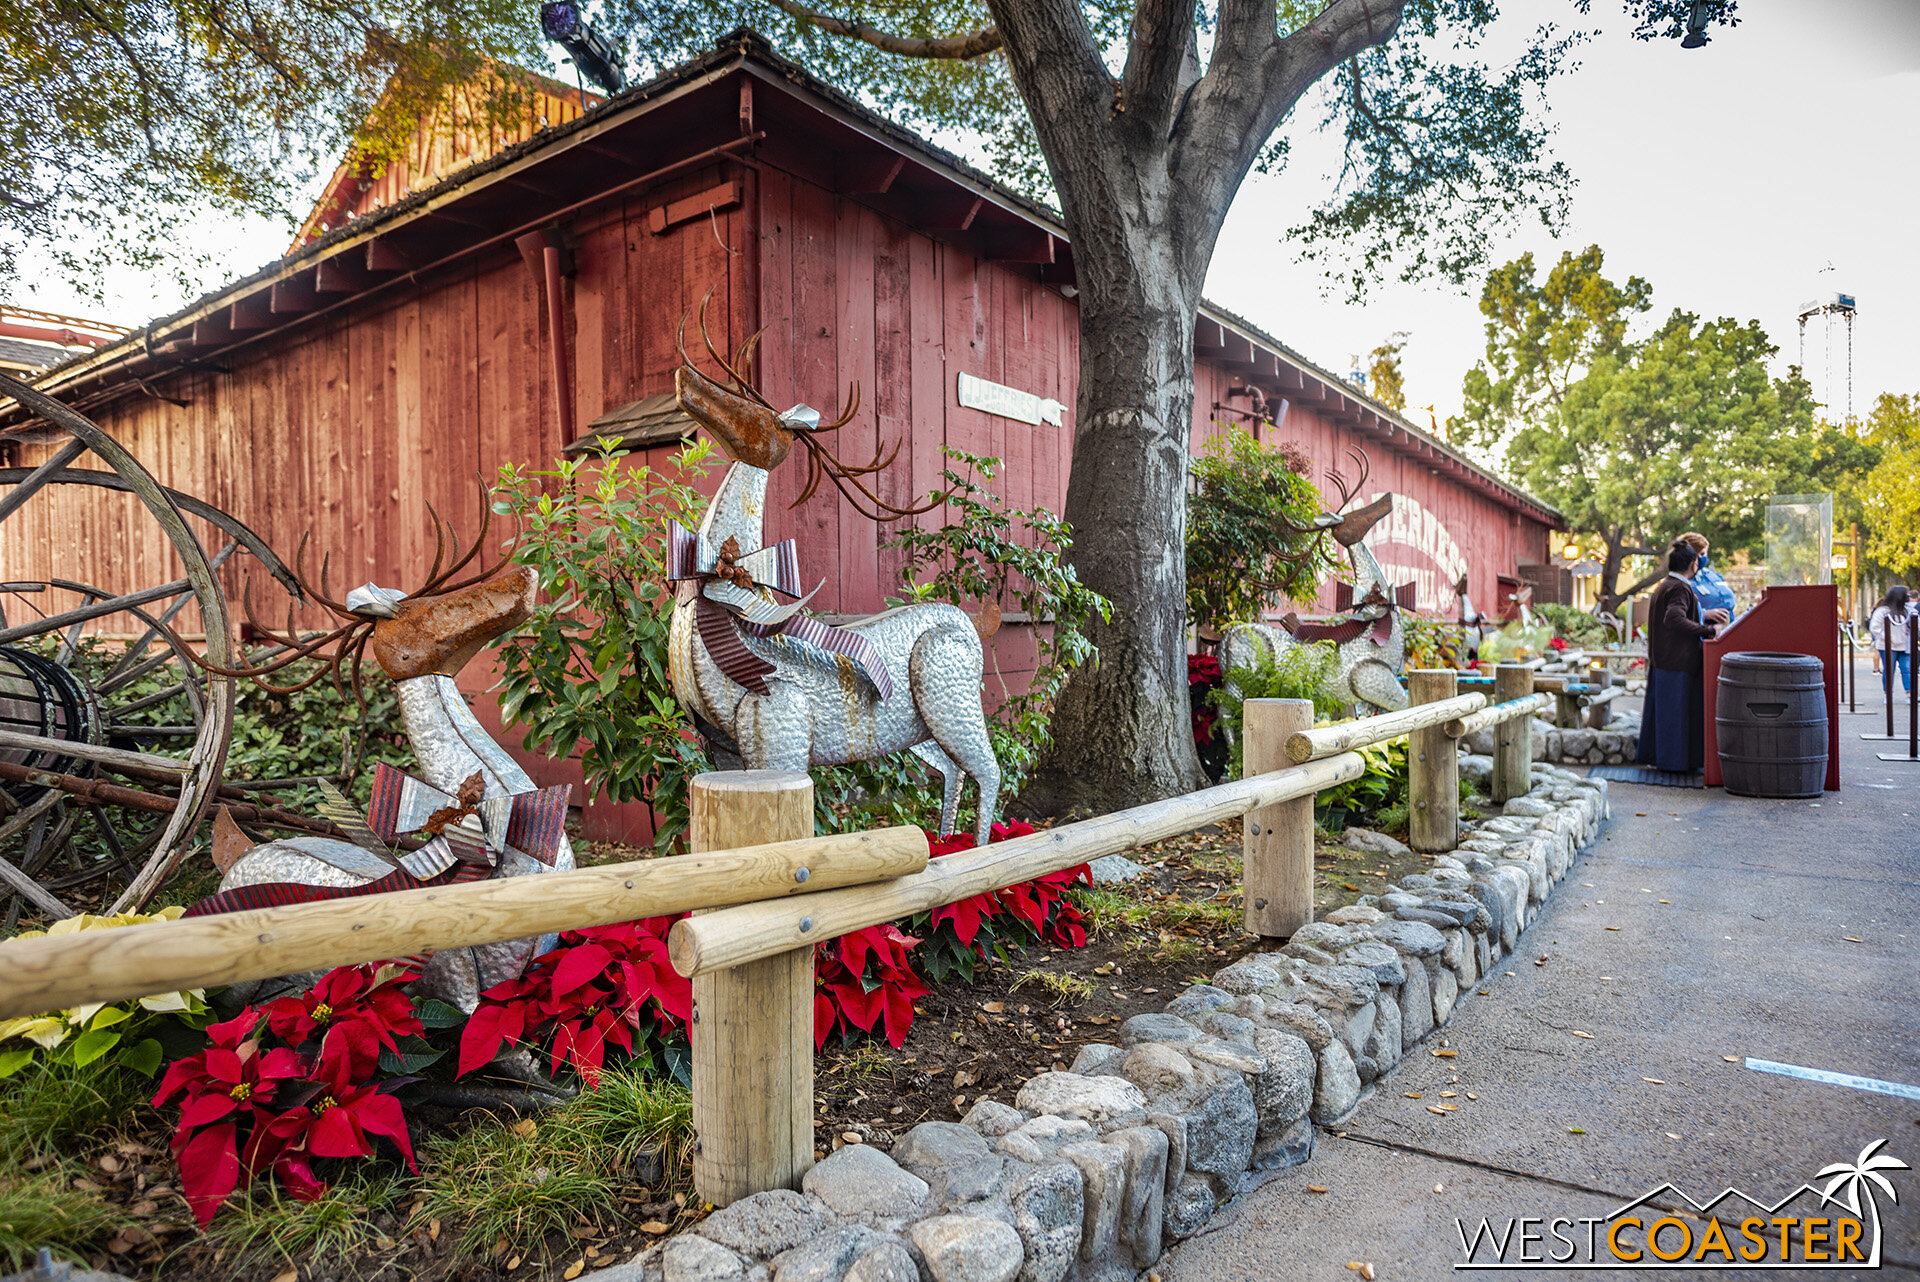  The Wilderness Dance Hall is once again home to the Santa Claus meet-and-greet. 